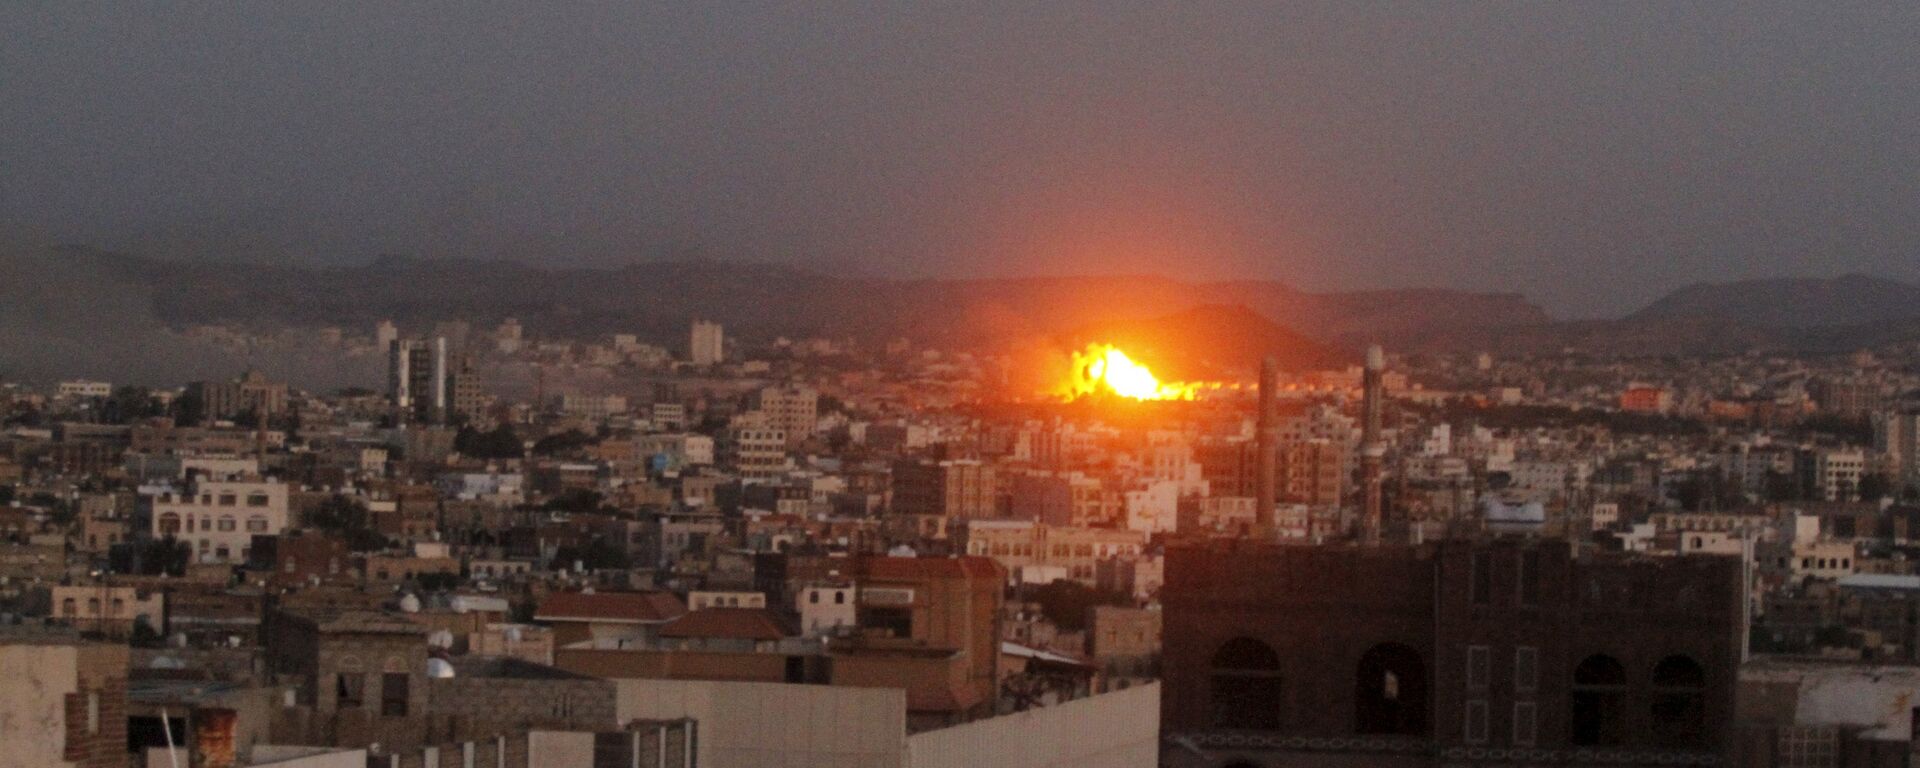 An explosion is seen after a Saudi-led air strike hit the weapons depots at a Houthi-controlled military base in Yemen's capital Sanaa September 12, 2015 - Sputnik Mundo, 1920, 05.02.2022